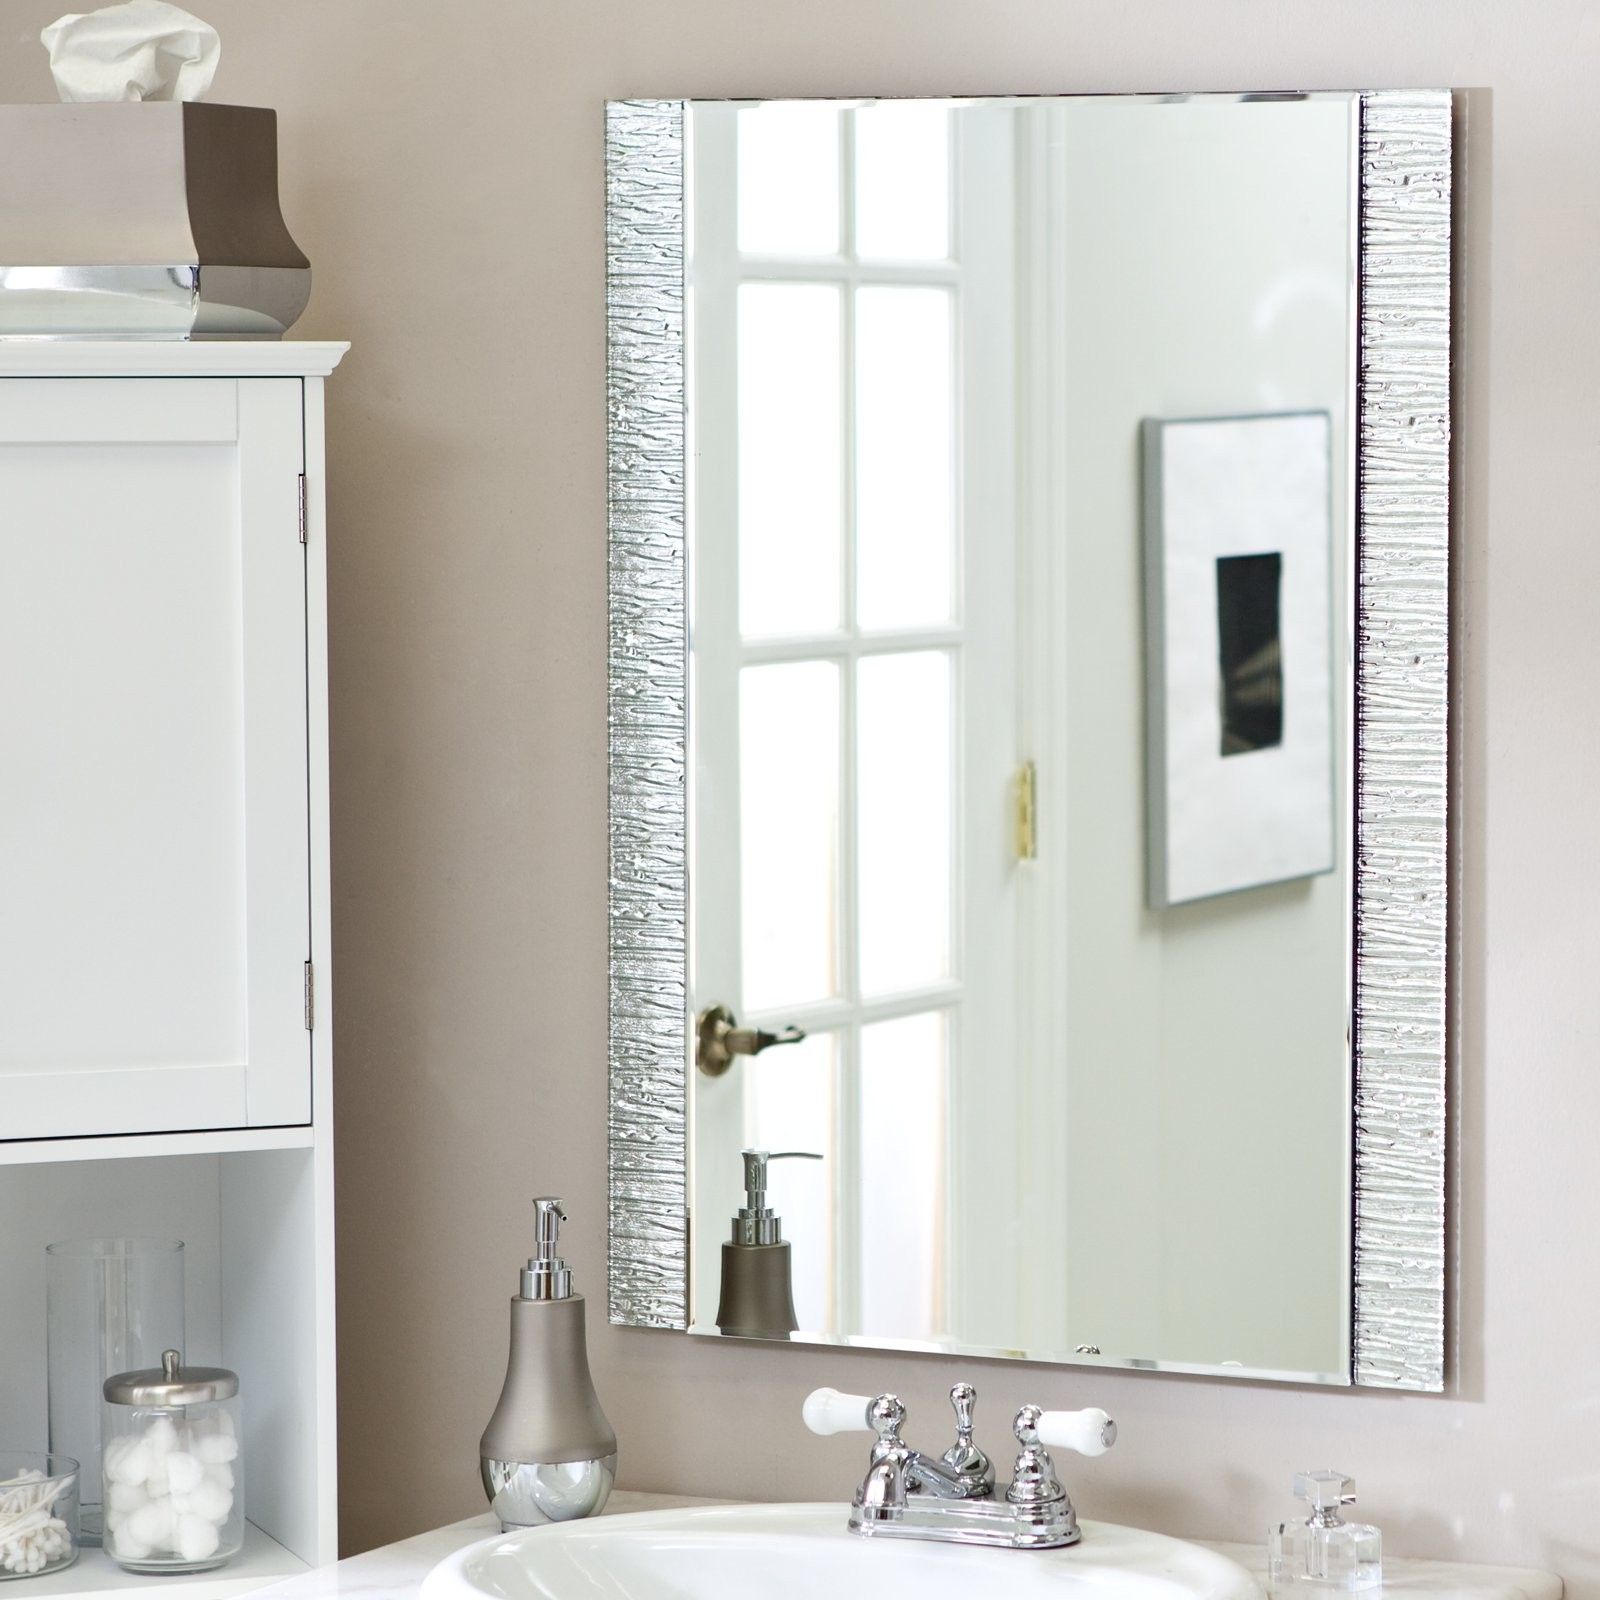 Awesome Bathroom Frameless Mirror Concept – Home Sweet Home | Modern Throughout Frameless Cut Corner Vanity Mirrors (View 14 of 15)